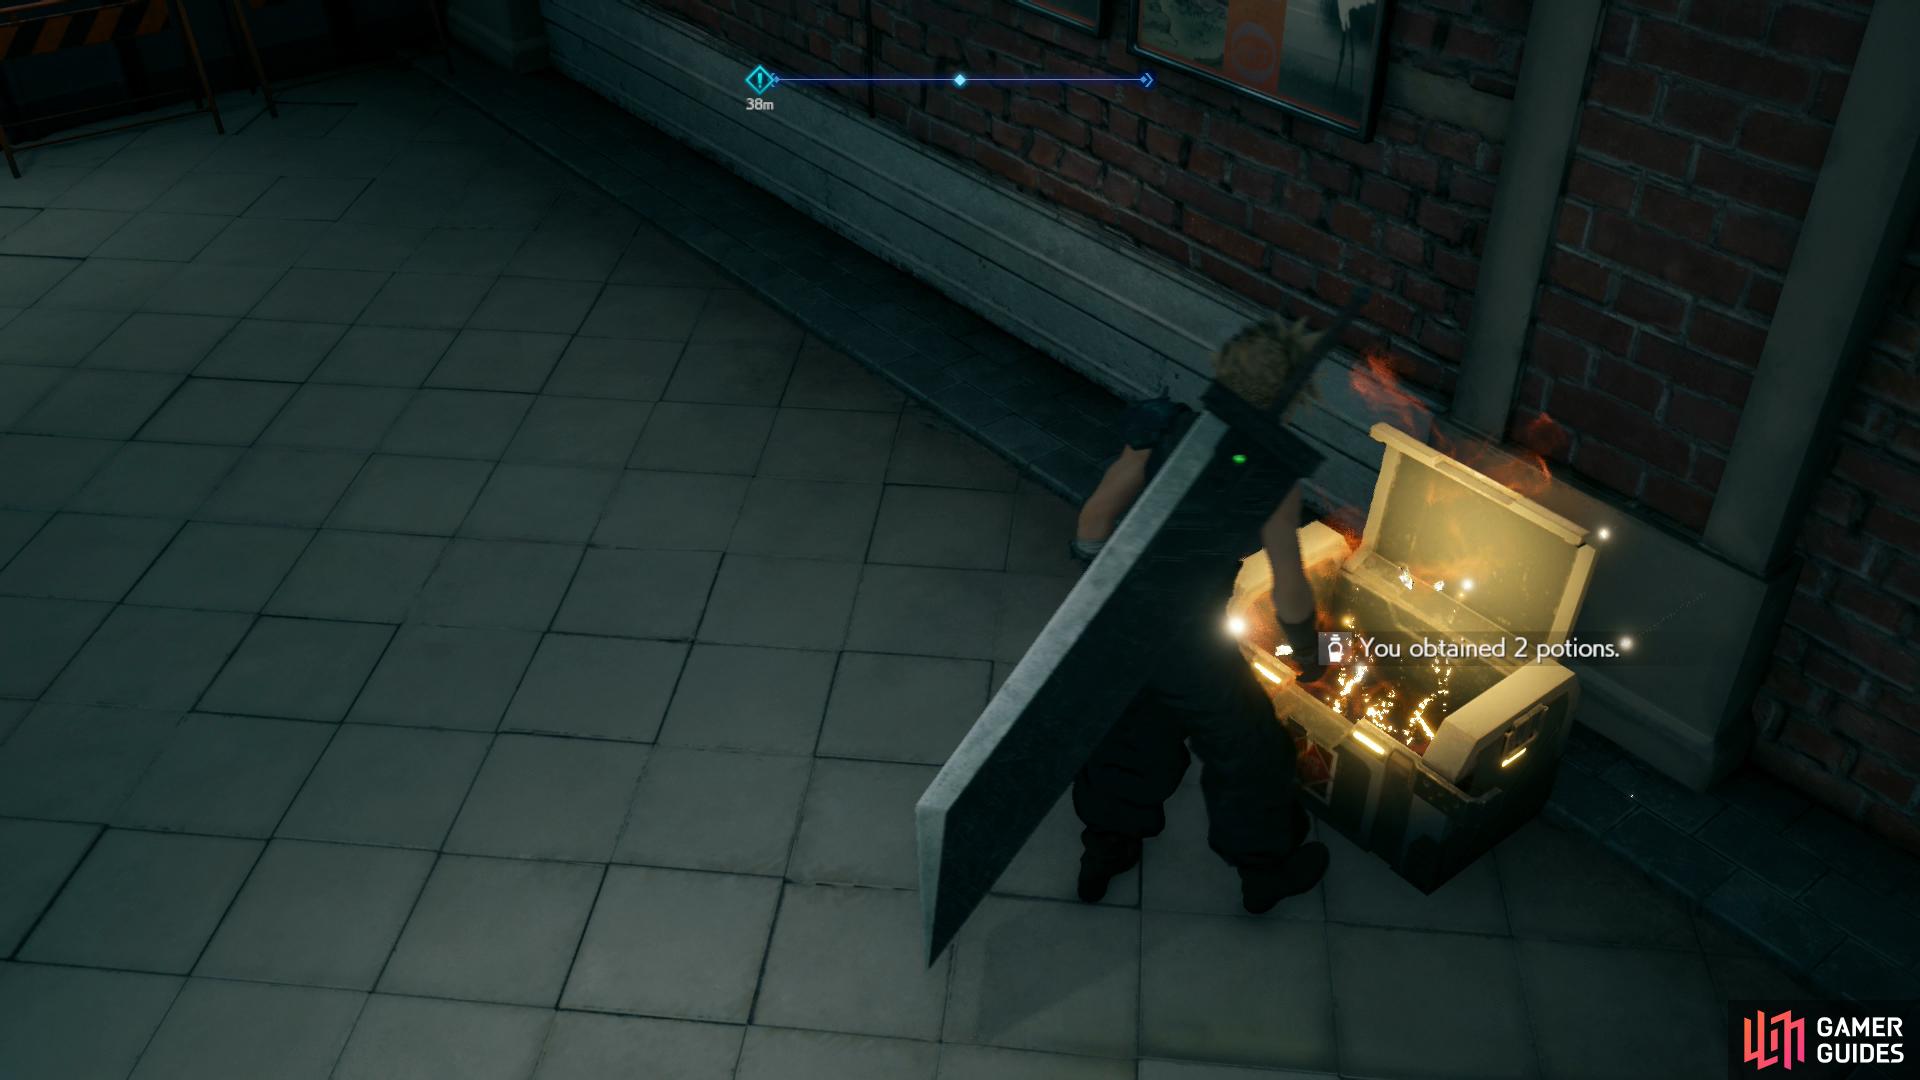 Scattered around the game you'll find chests, which typically contain static loot of variable quality.